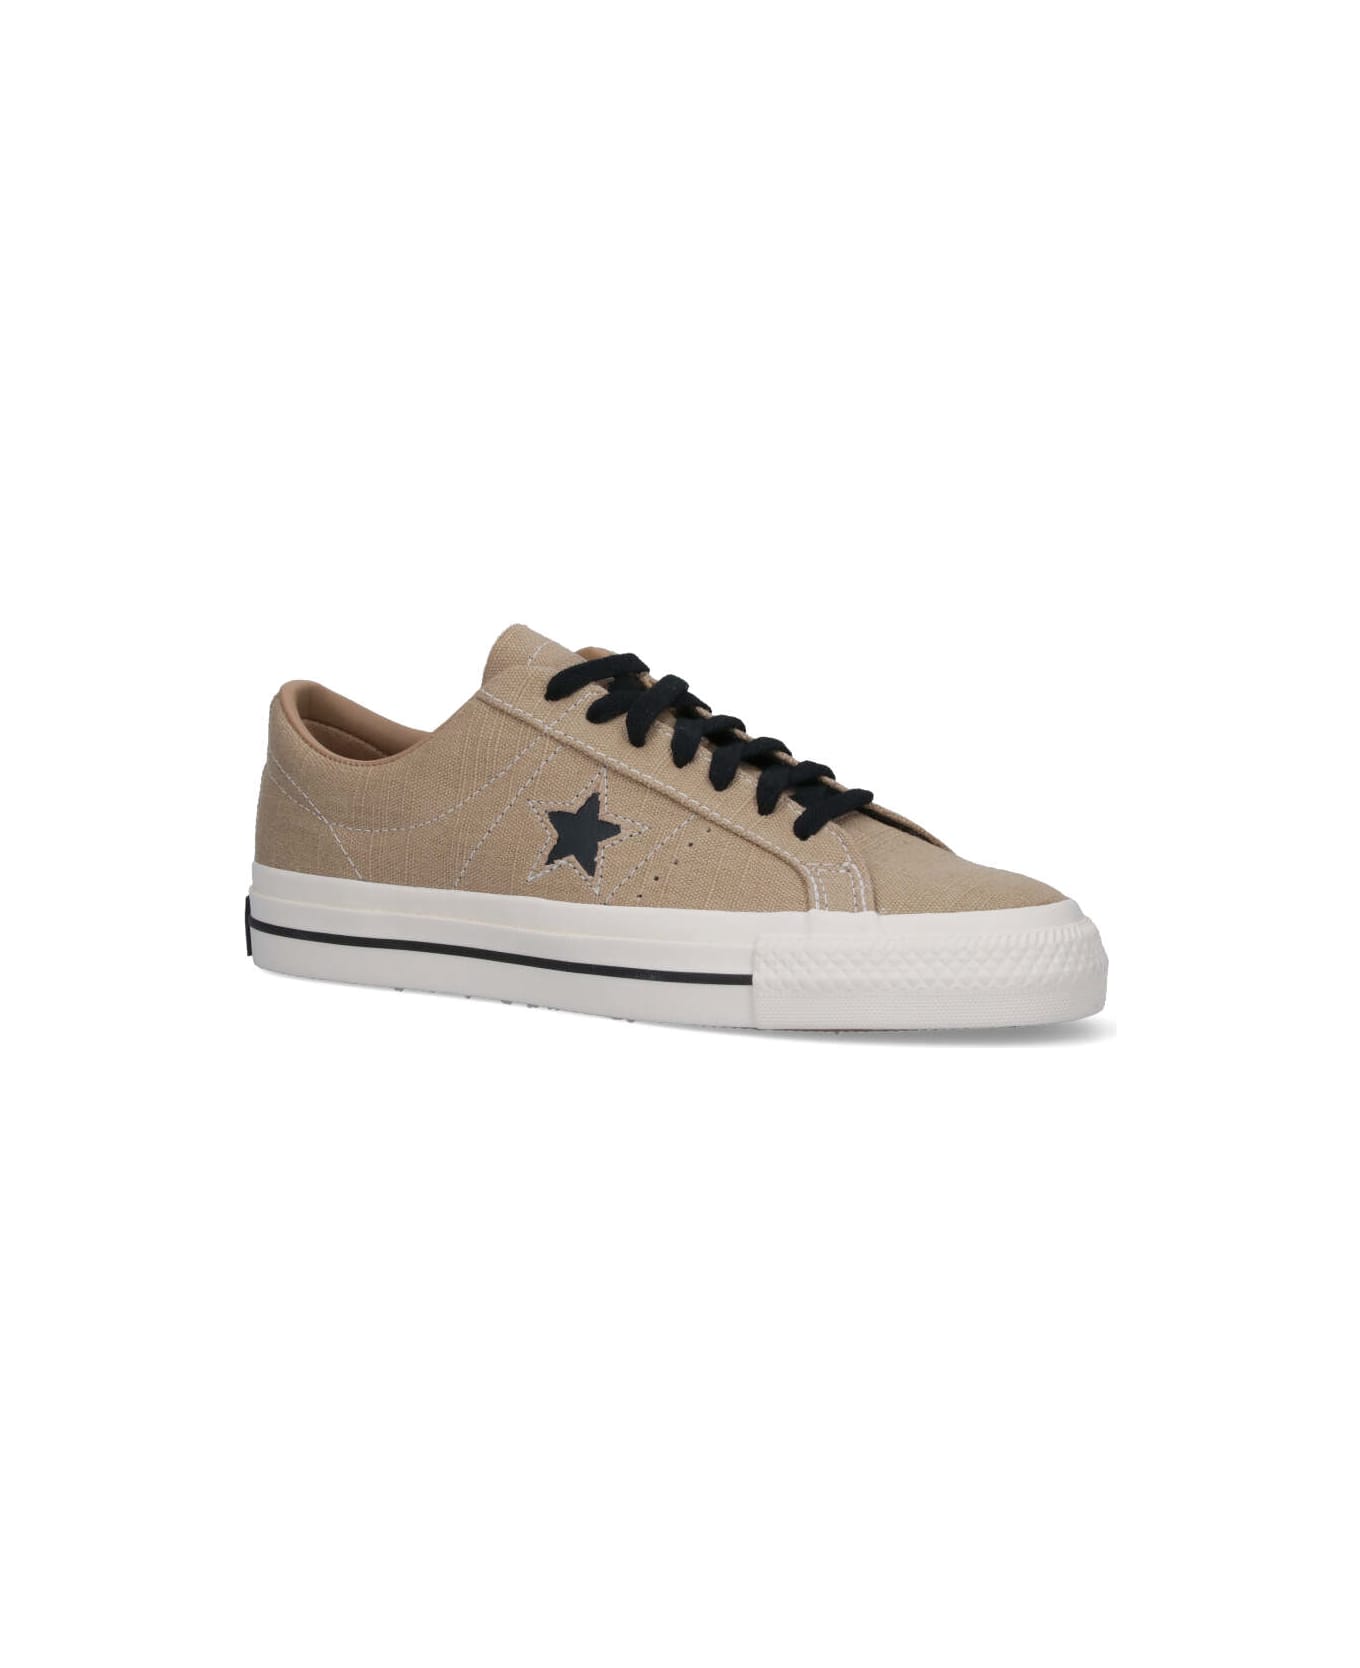 Converse "cons One Star Pro" Sneakers - Beige